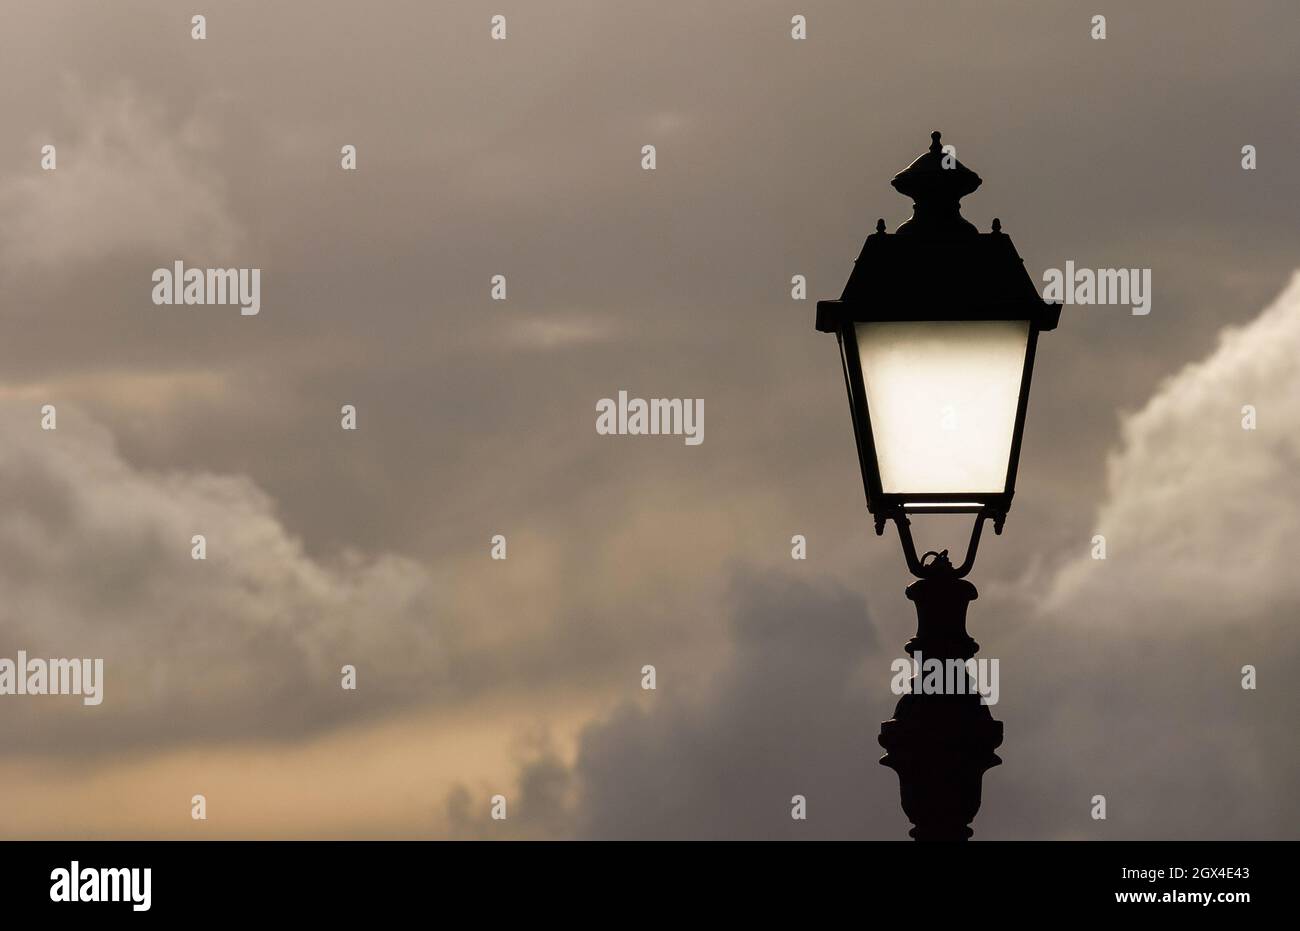 Old fashioned street lamp against cloudy sky (with copy space) Stock Photo